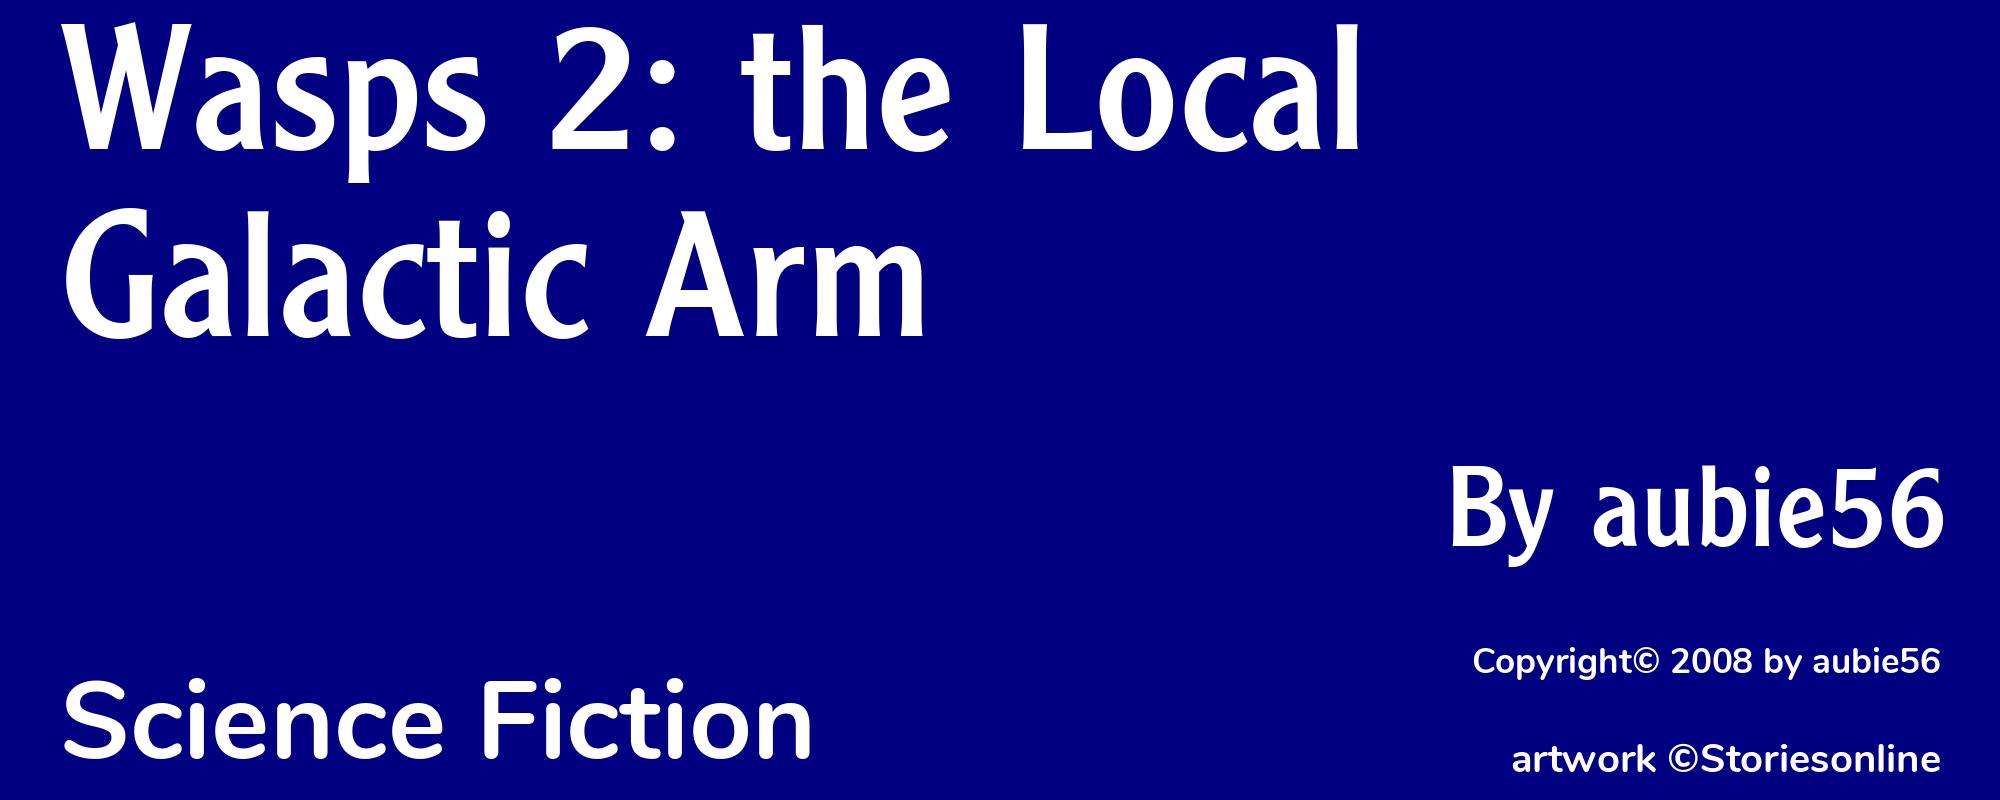 Wasps 2: the Local Galactic Arm - Cover